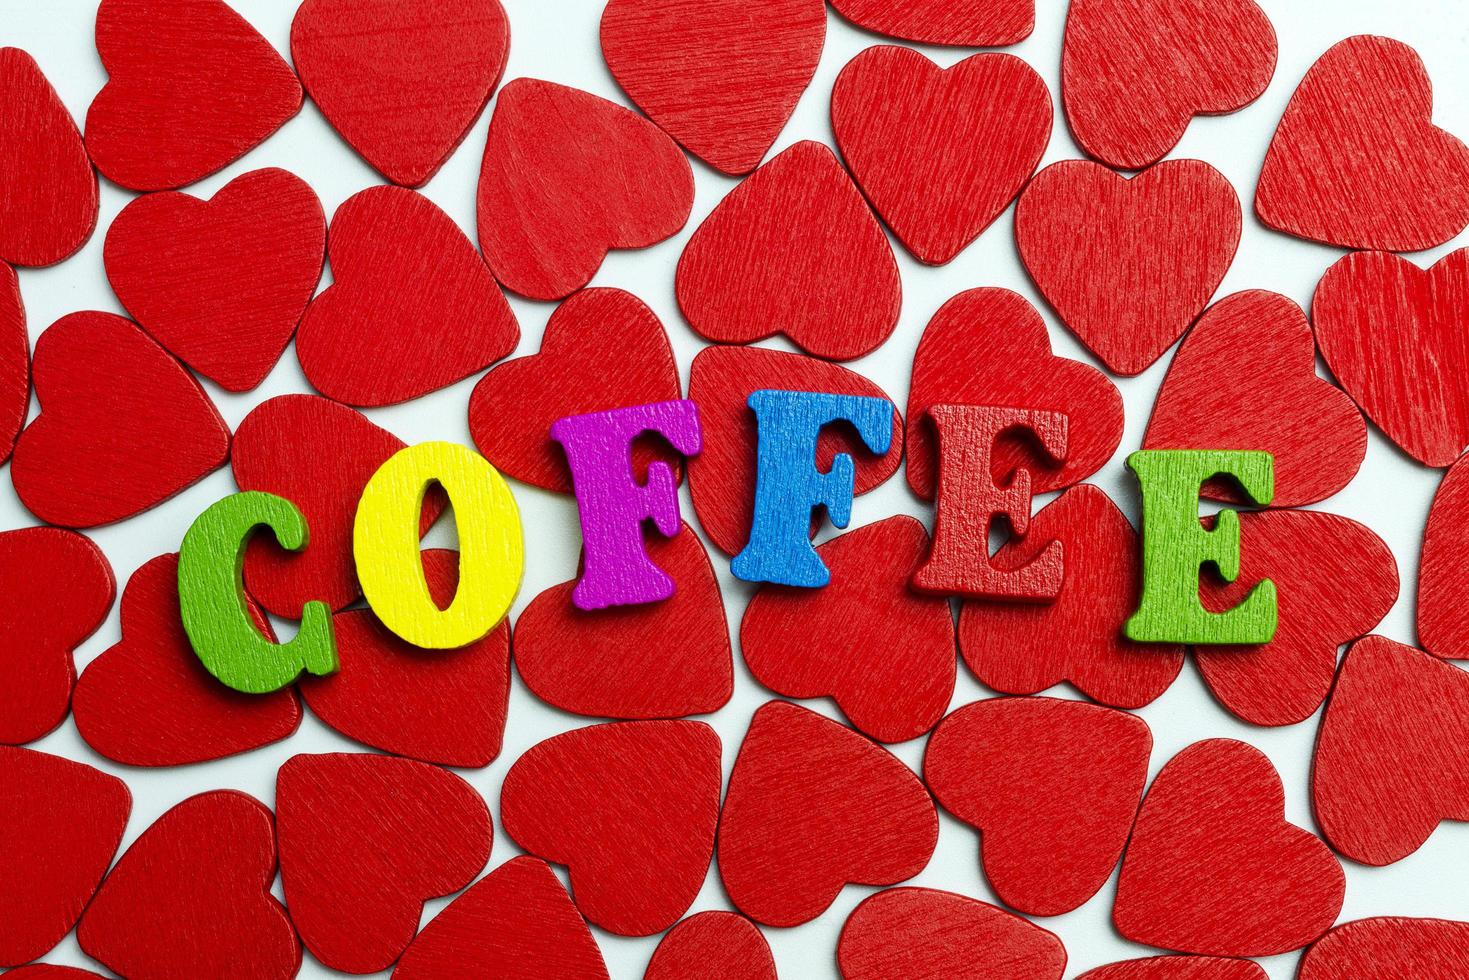 The word coffee is laid out on the hearts. photo